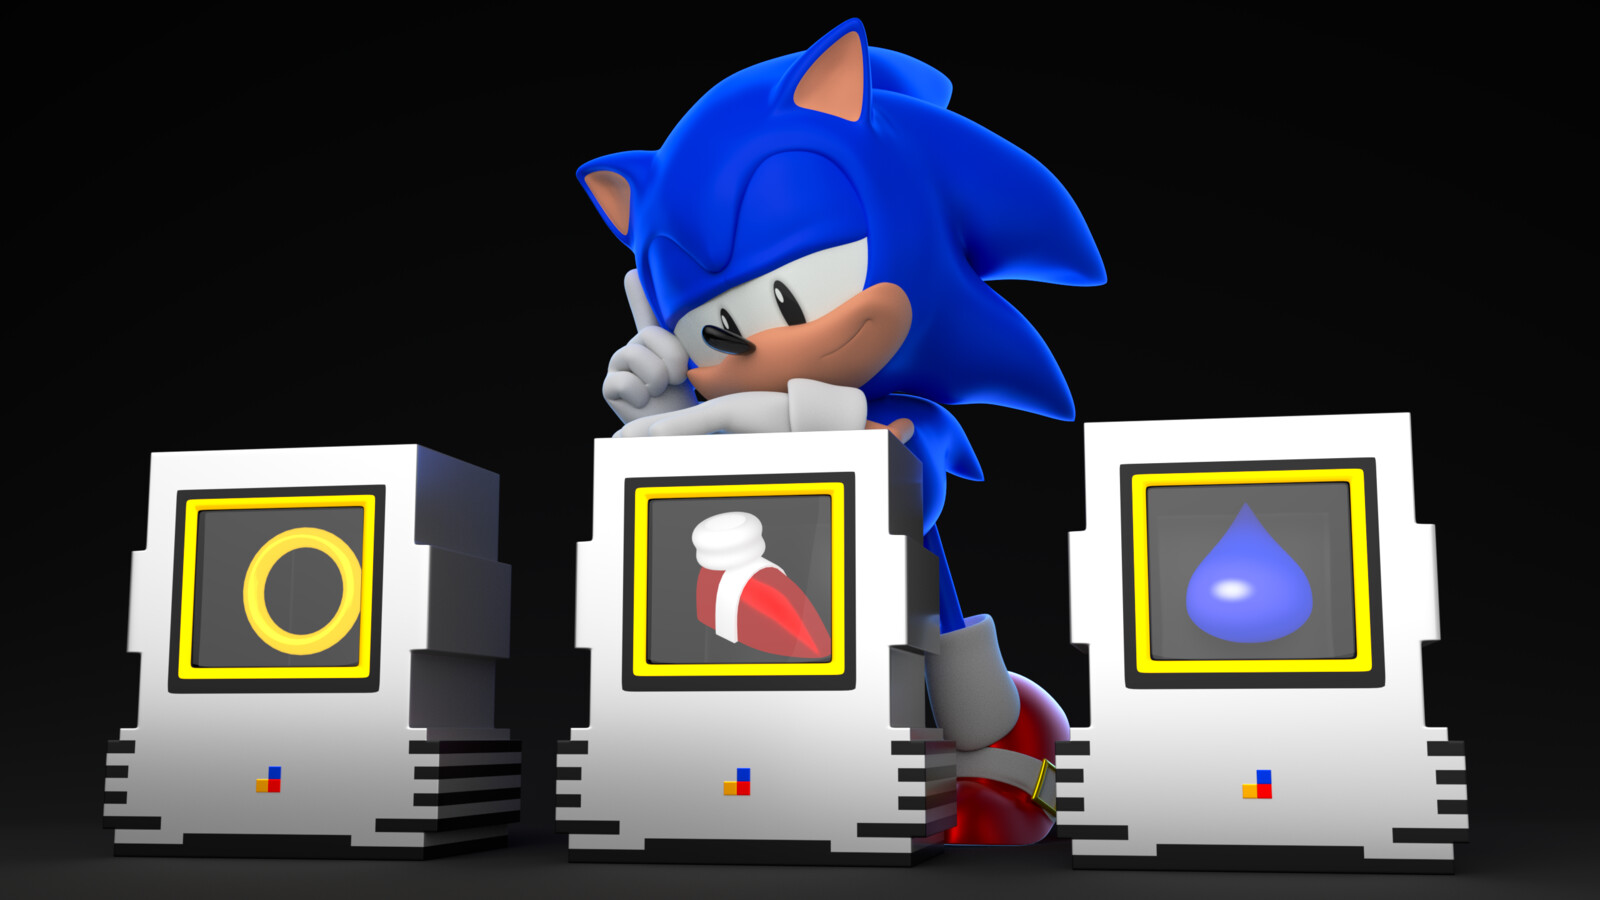 A fun little alternate angle of Sonic admiring a Speed Shoes Item Box. I made custom materials for TheBlueBlur's Classic Sonic rig (https://gumroad.com/imeda3d#AZGHj)